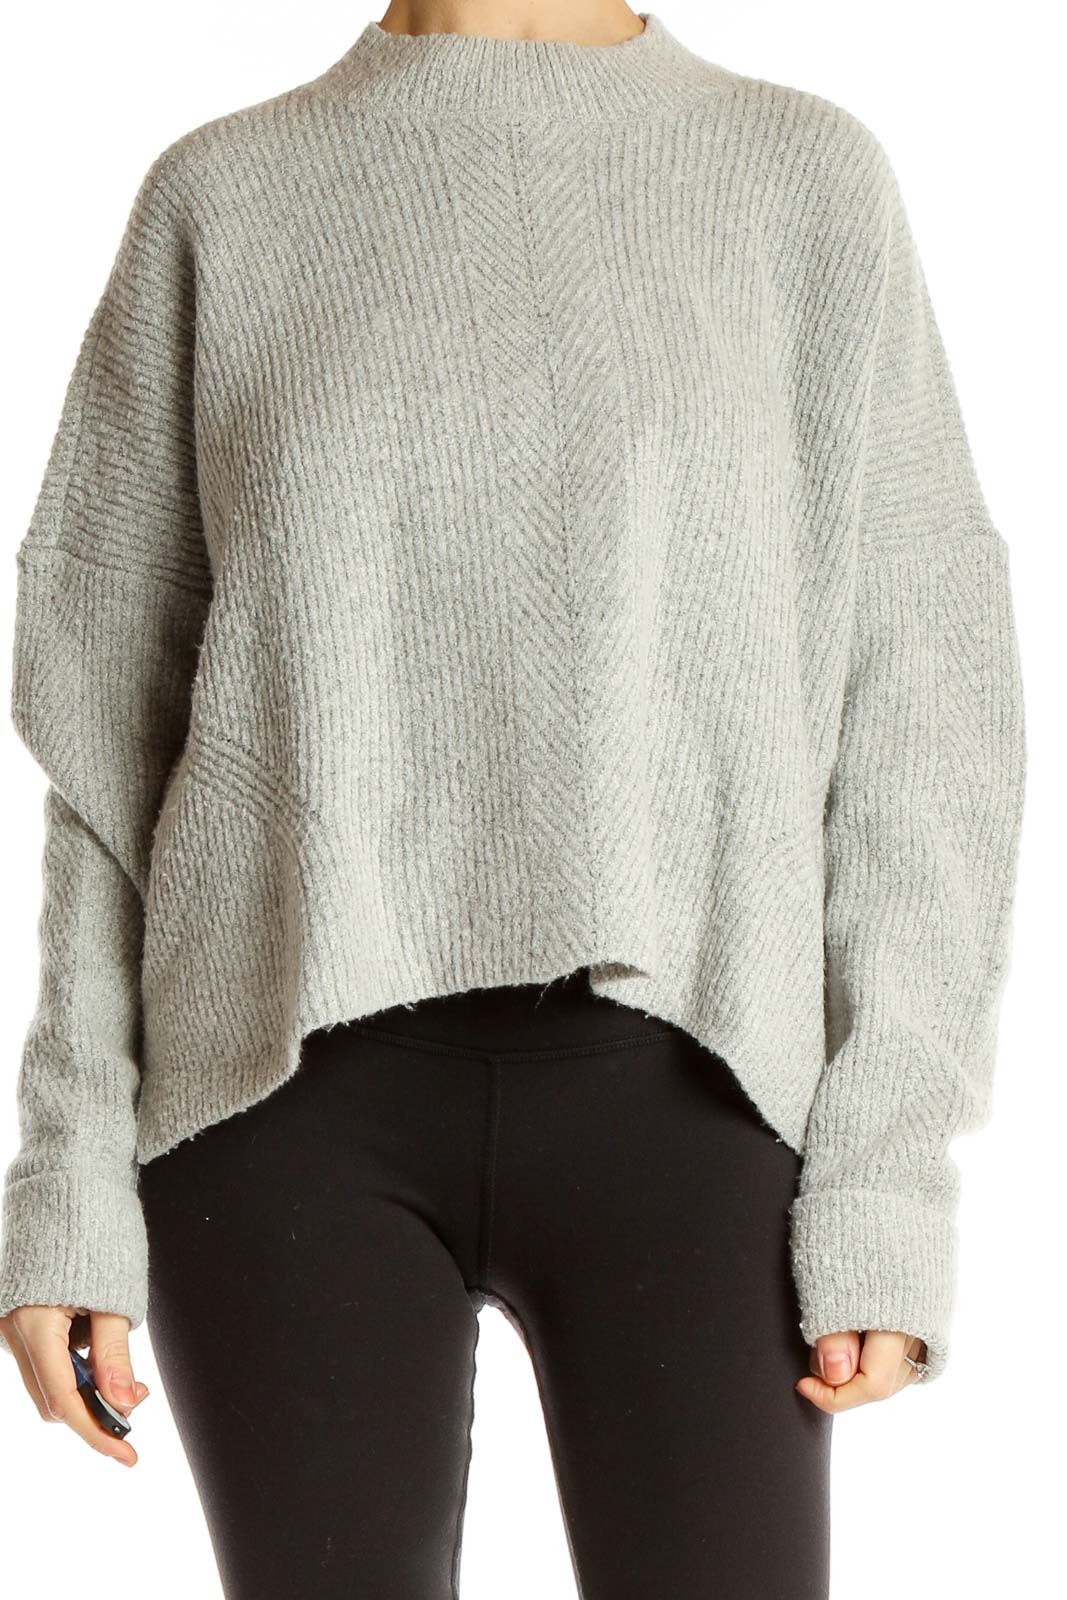 Gray Mock Neck Chic Sweater Front